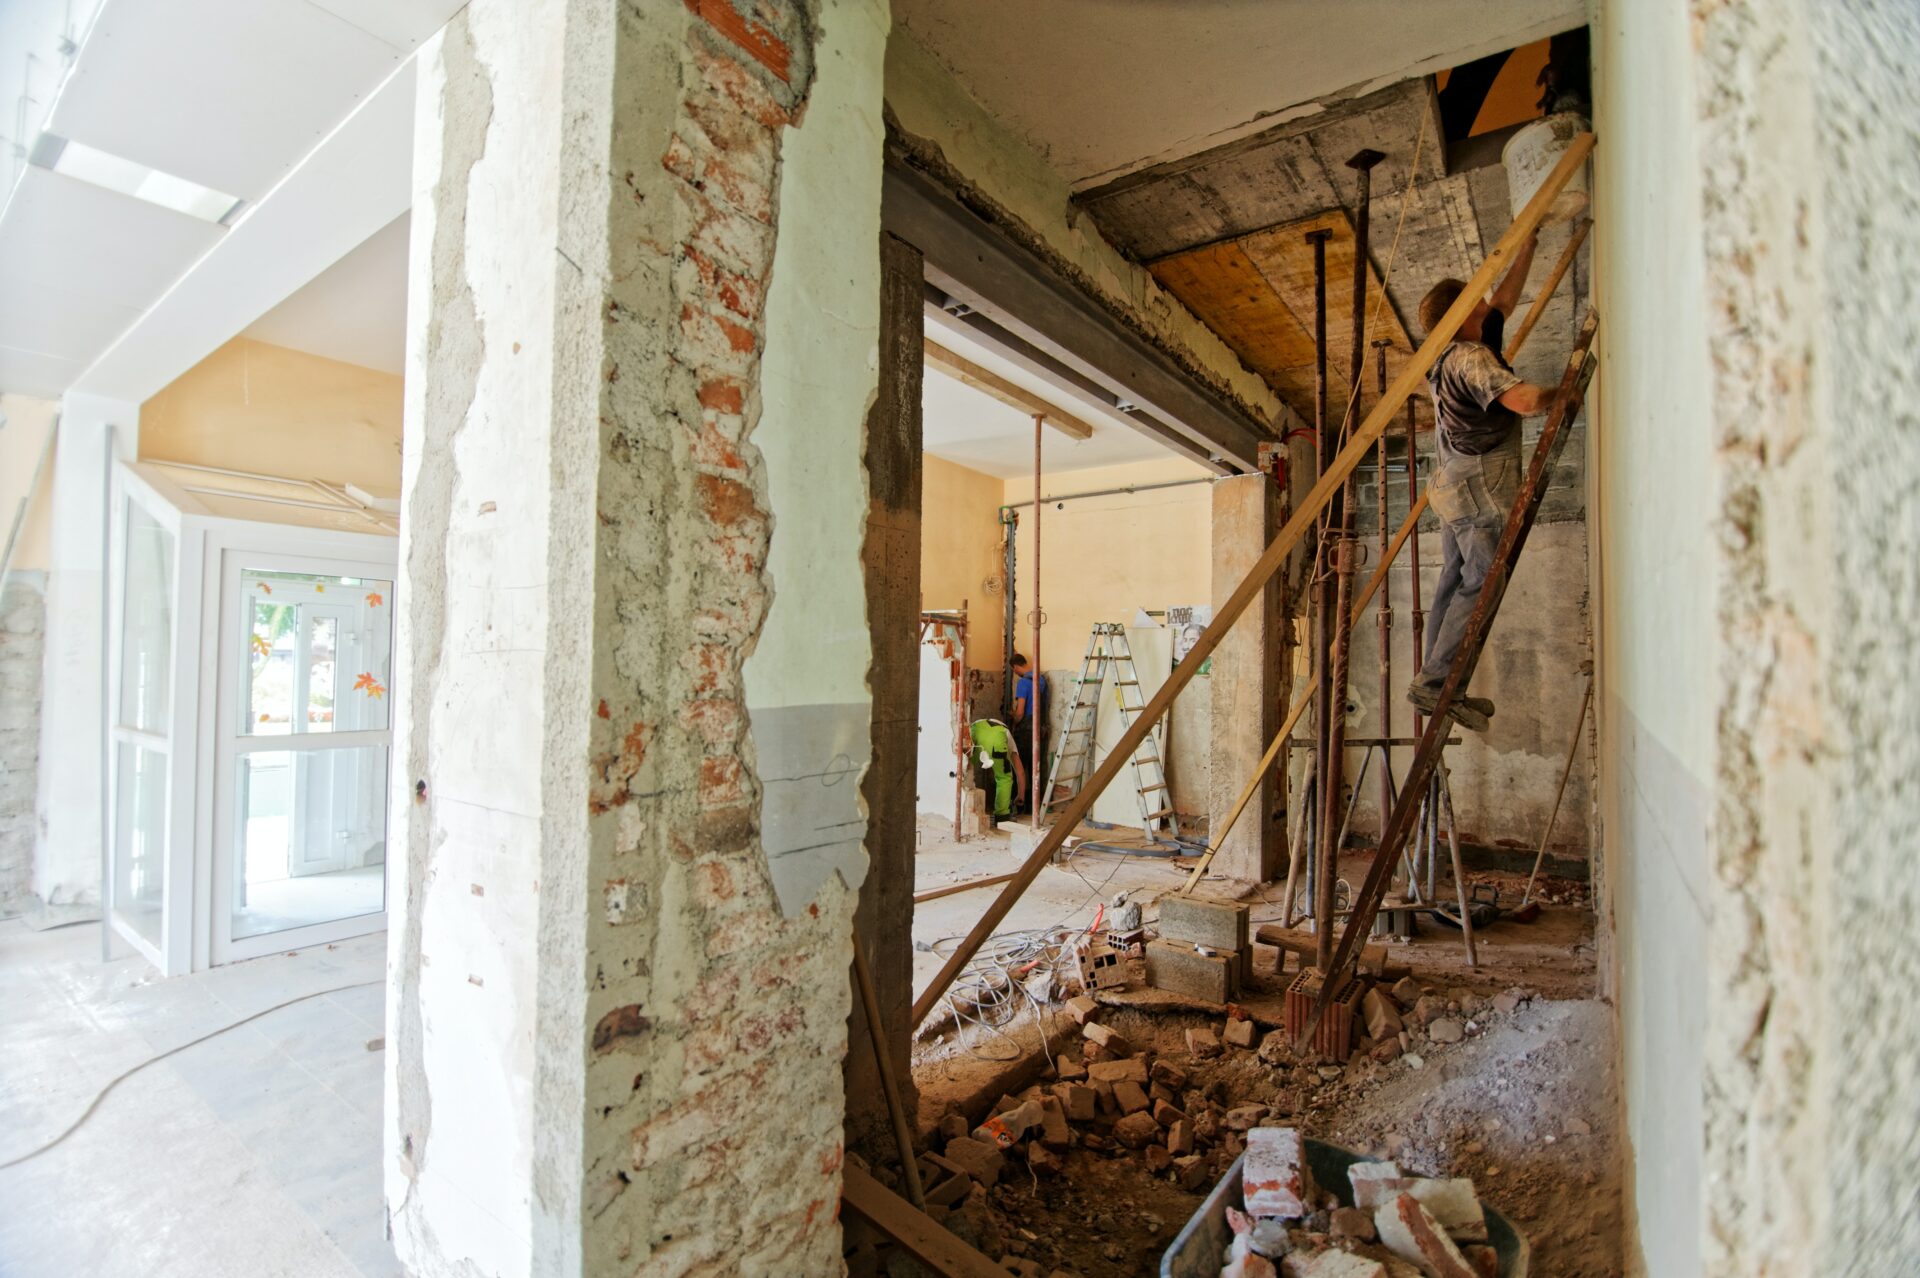 Interiors of a building undergoing dilapidations work. A pillar of bricks splits the image. To the left, a renovated entrance. To the right, two builders conduct repairs on the walls and ceiling.